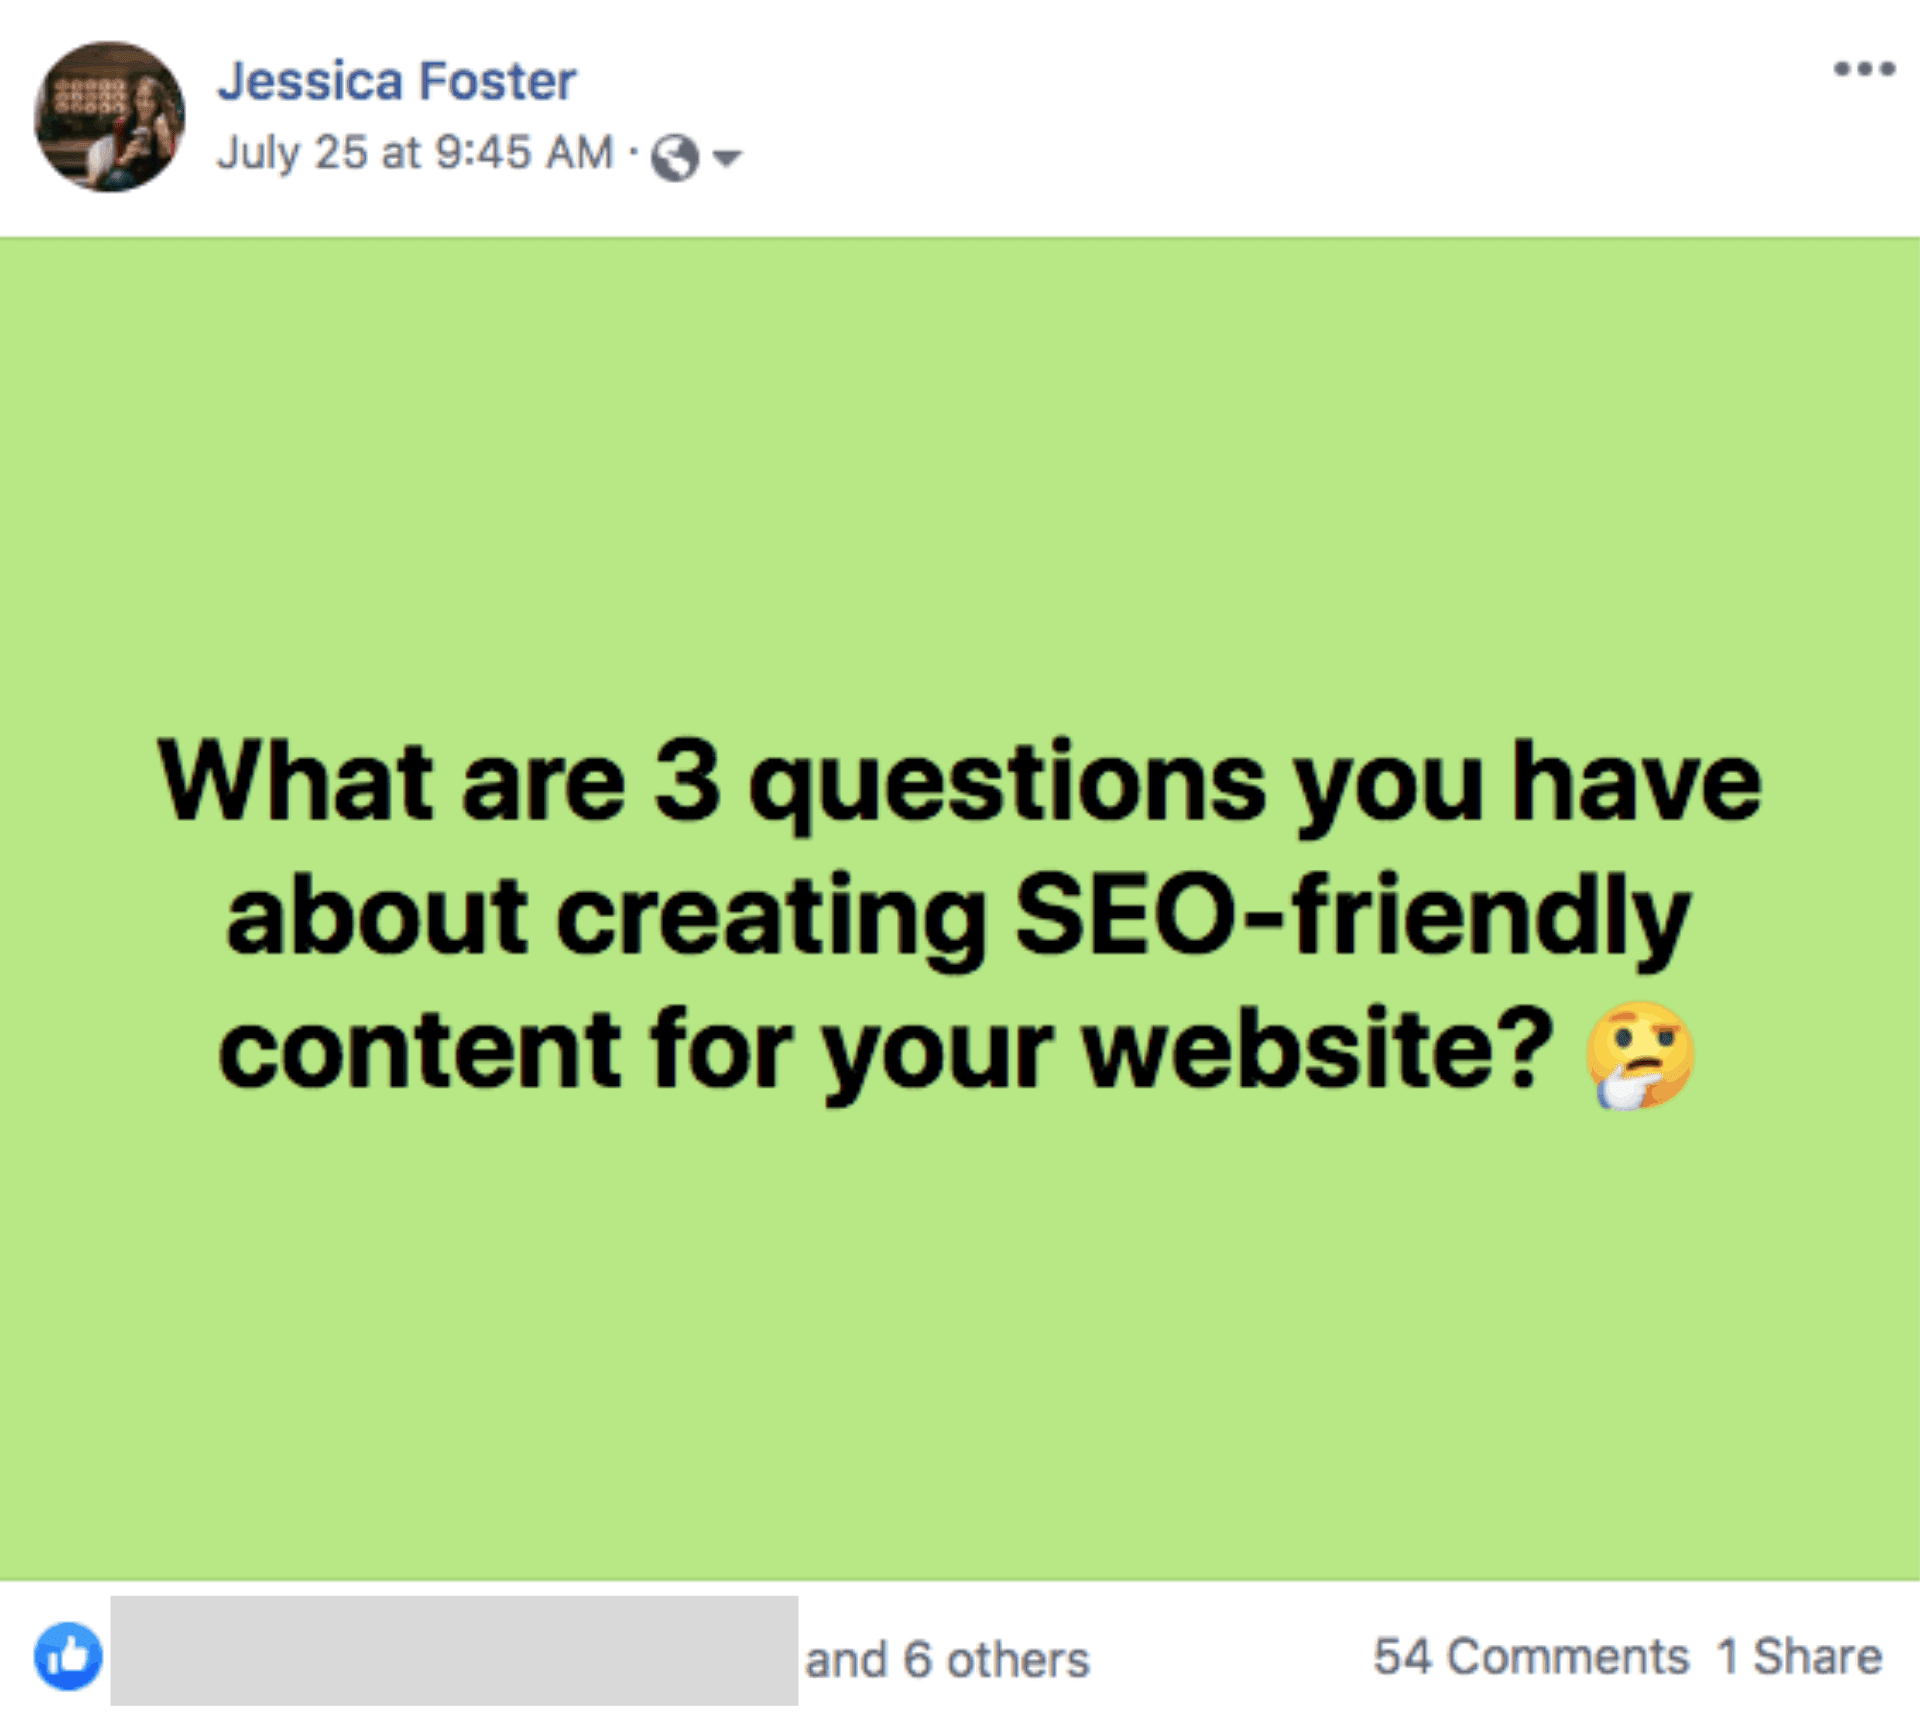 Screenshot of Facebook post by Jessica Foster that asks "What are 3 questions you have about creating SEO-friendly content for your website?"